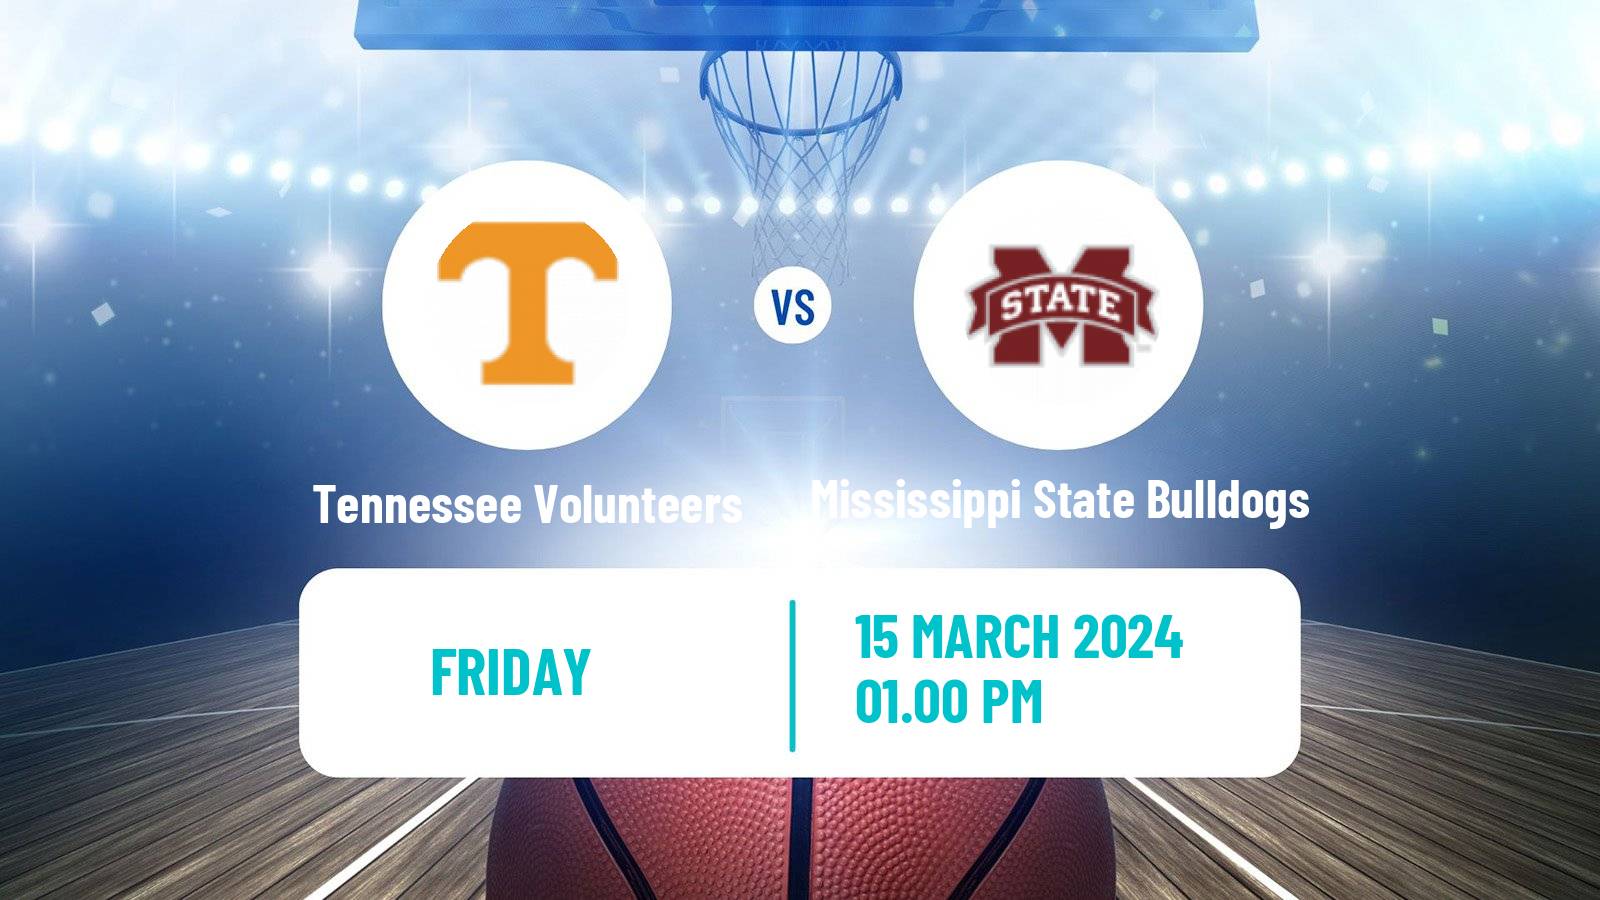 Basketball NCAA College Basketball Tennessee Volunteers - Mississippi State Bulldogs